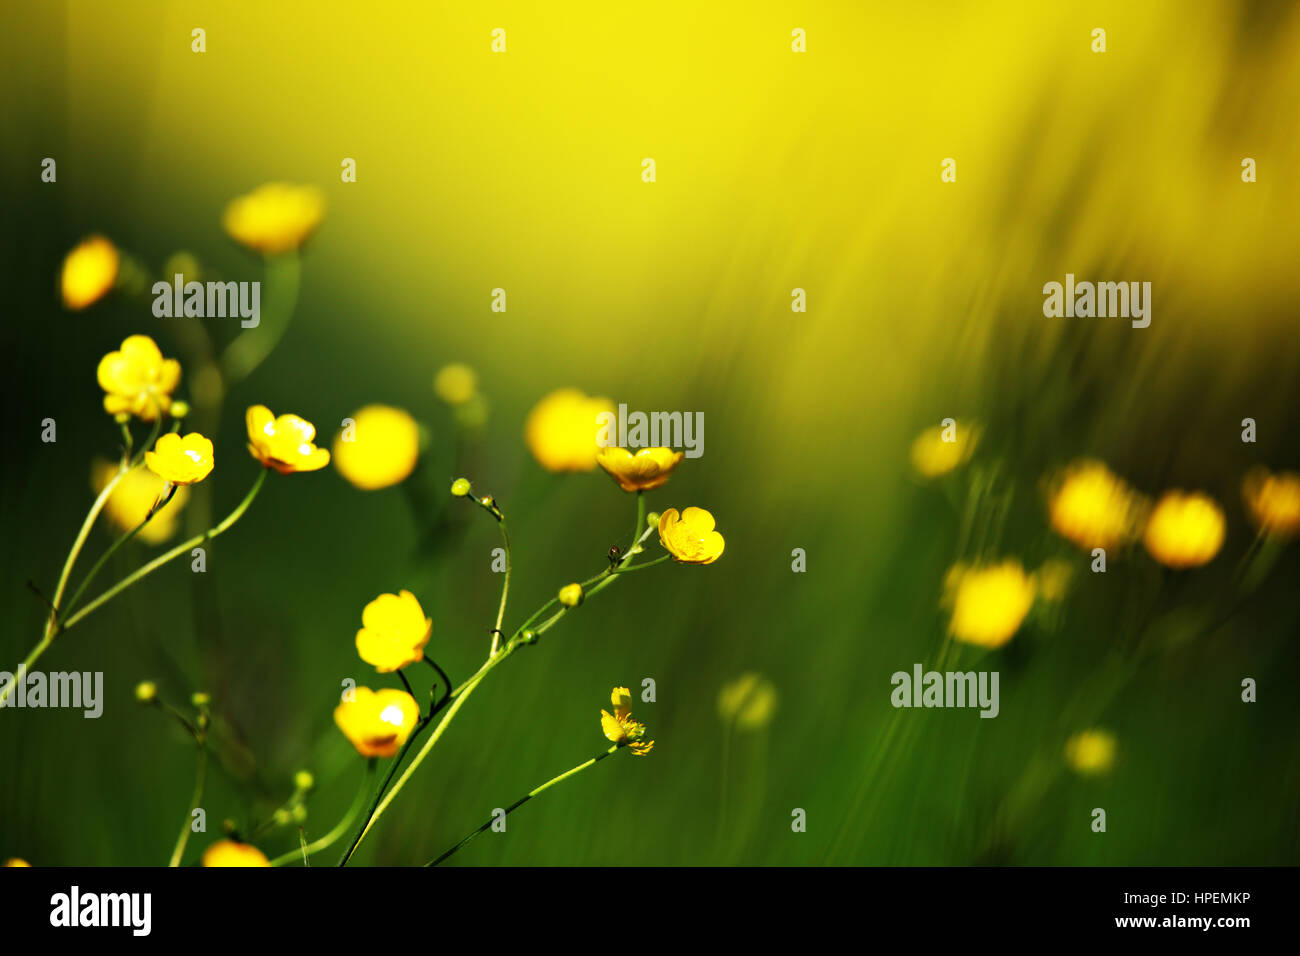 close up of yellow flowers on field on blurred background Stock Photo